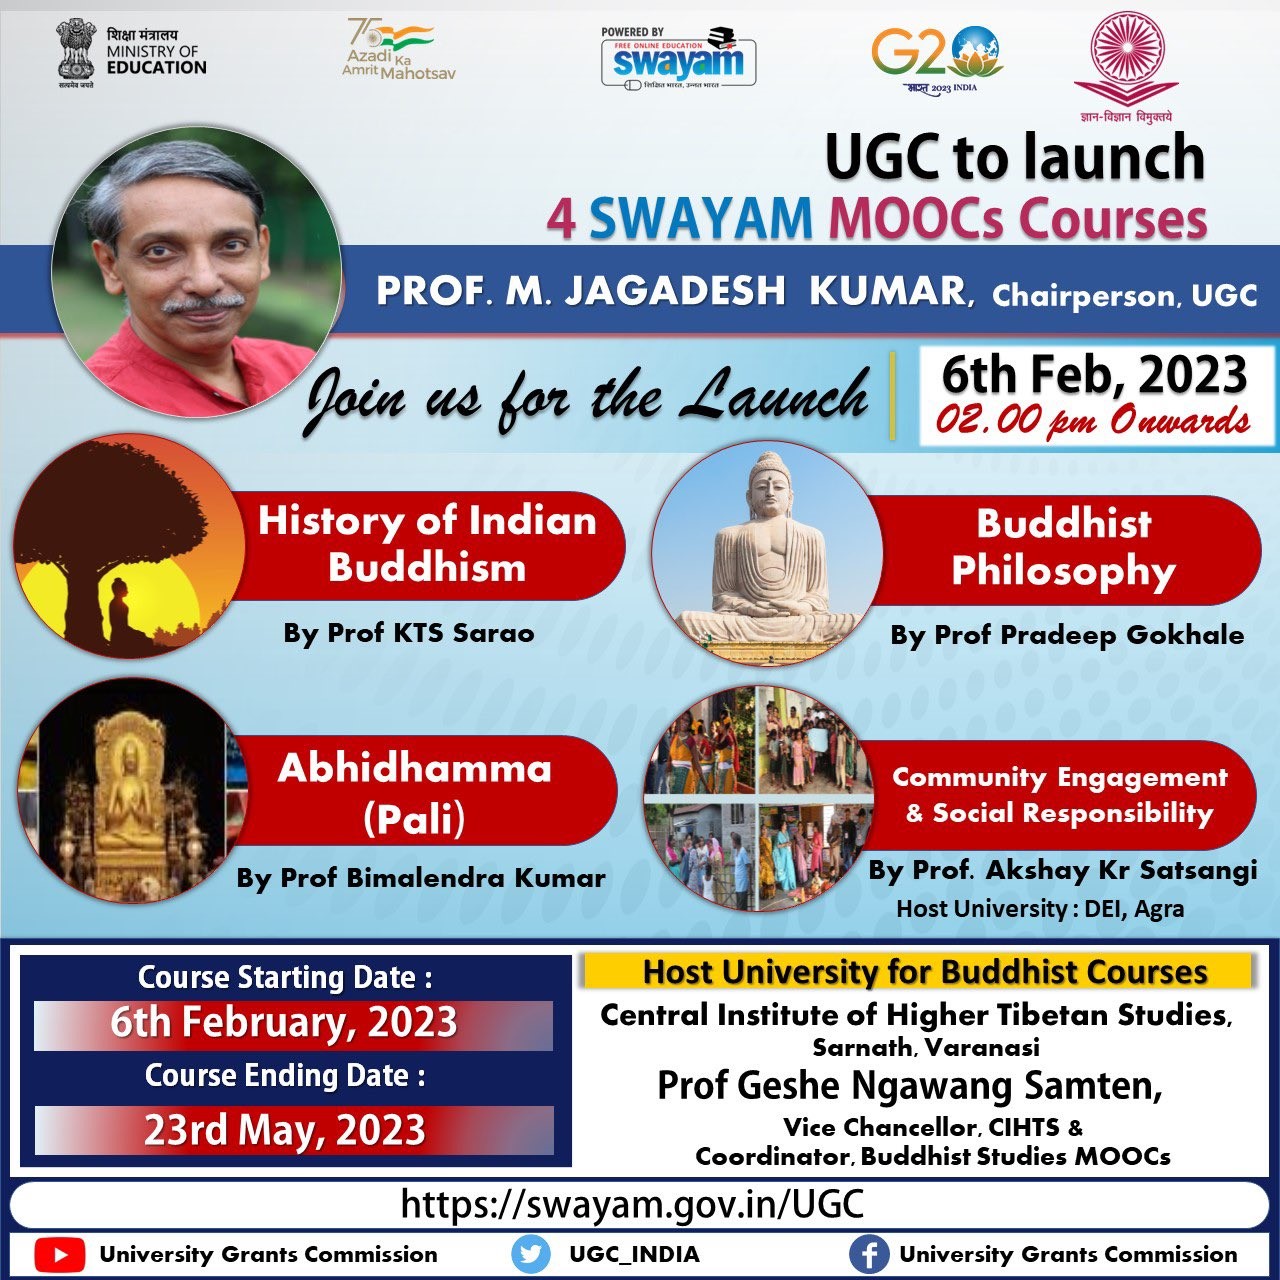 #UGC Chairman to launch 4 #SWAYAM #MOOCs on 6th February, 2023 from 2:00pm onwards.